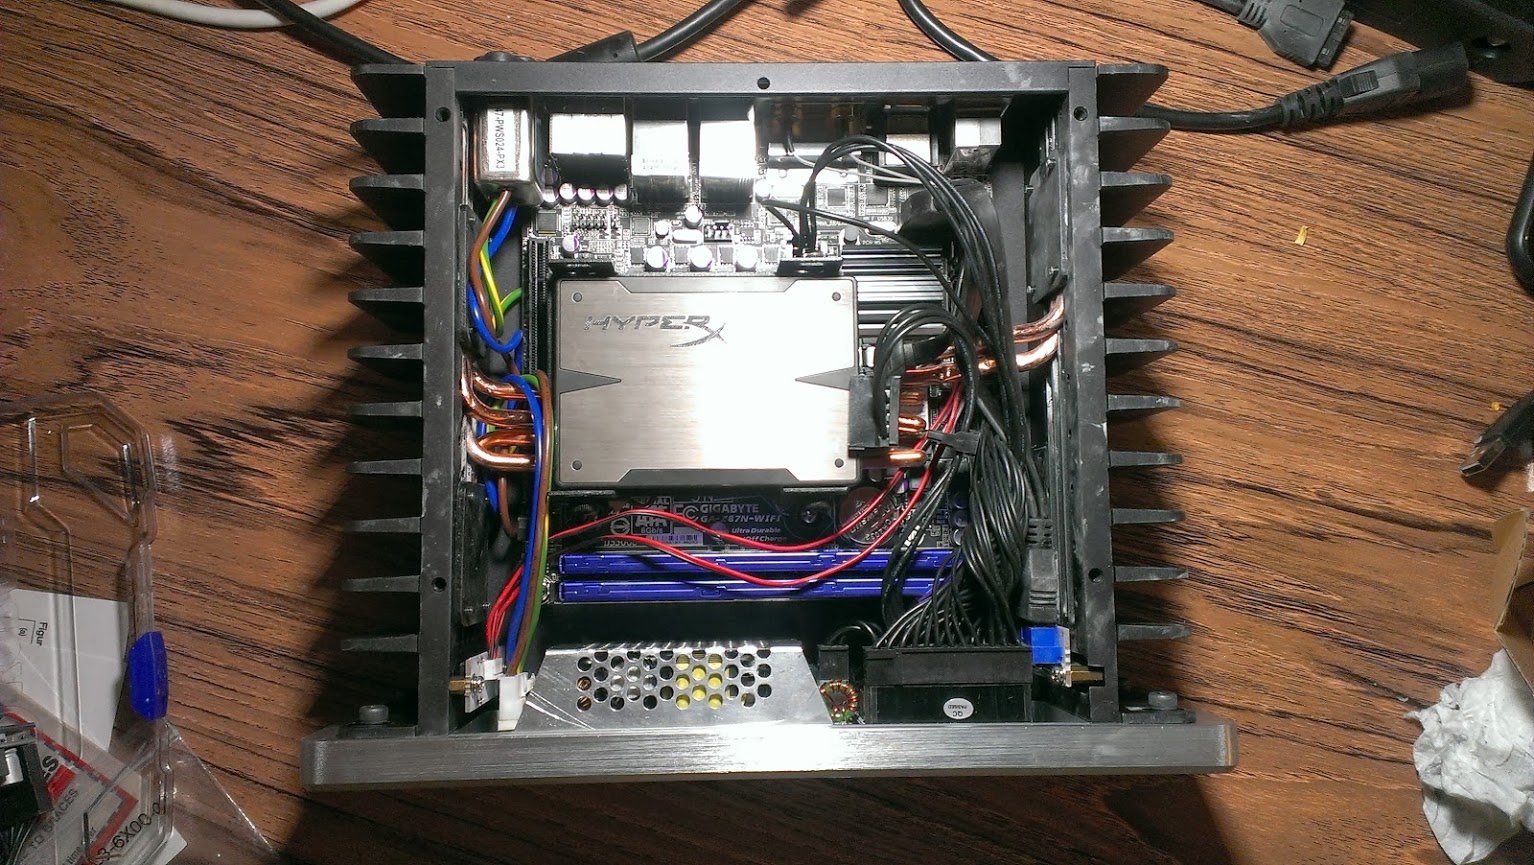 My fanless pc using HDPLEX H1.S computer chassis and Gigabyte GA-Z87N